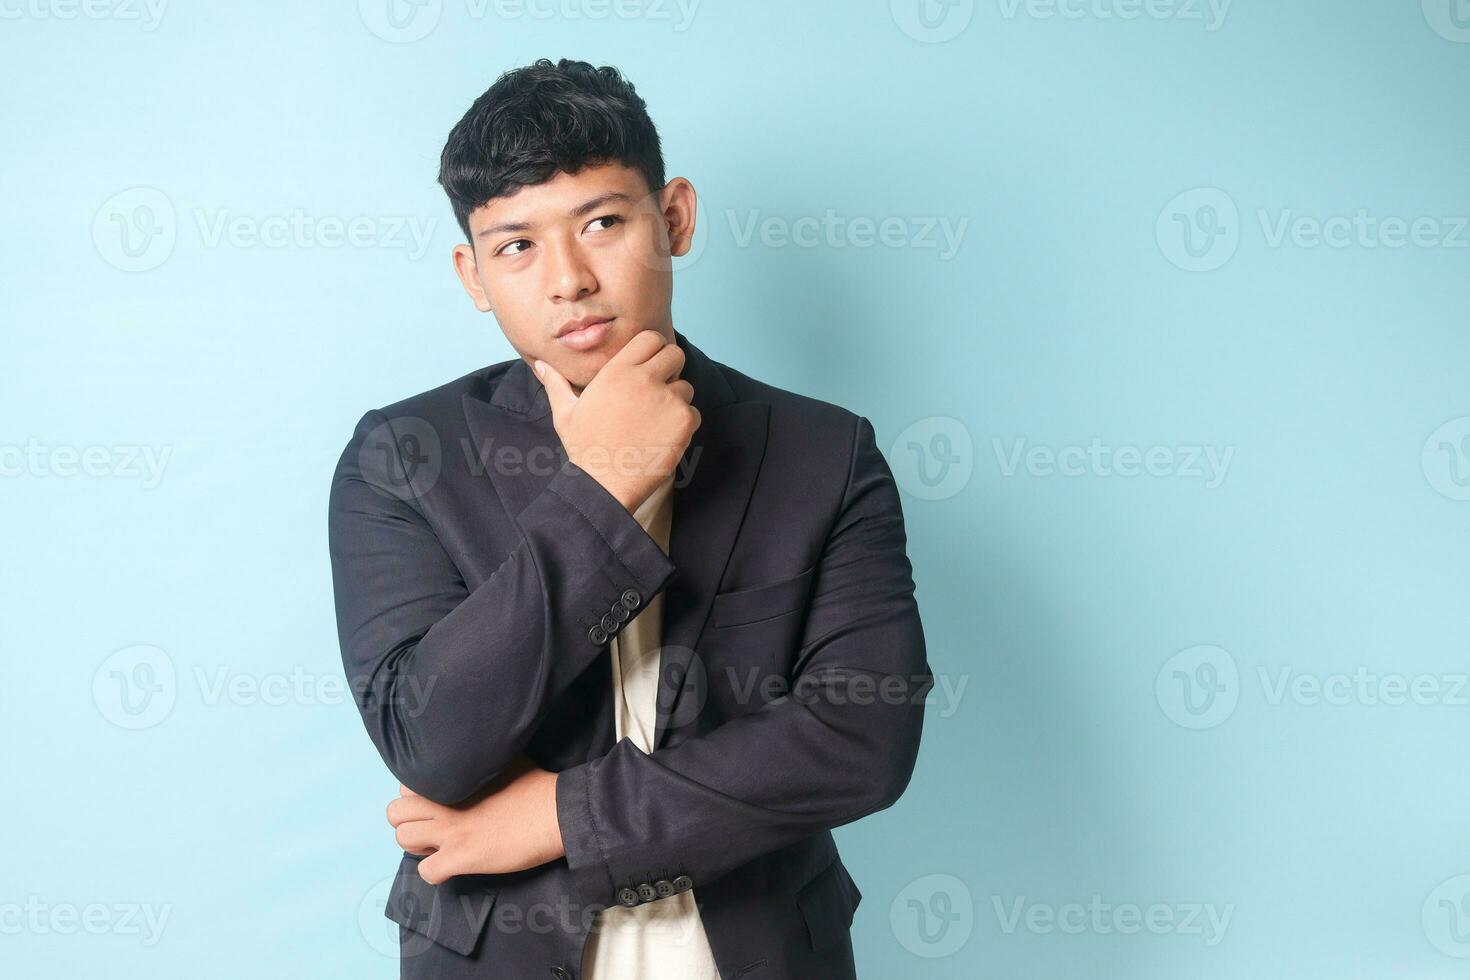 Portrait of young Asian business man in casual suit thinking hard while looking away. Isolated image on blue background photo